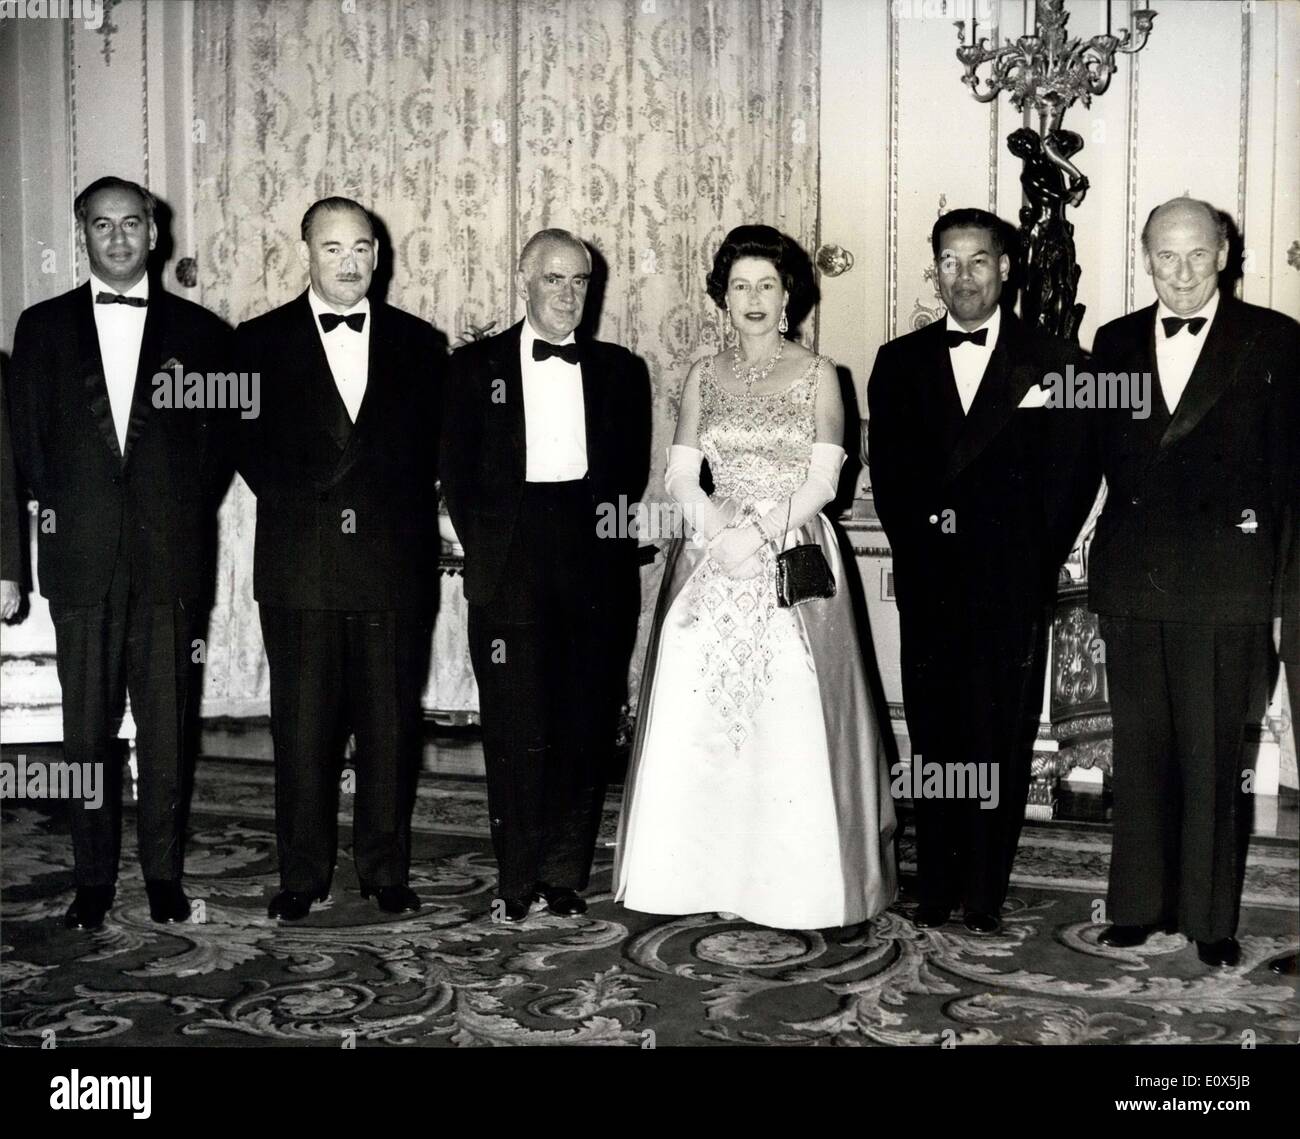 May 04, 1965 - Queen Elizabeth With Council Of Ministers Of Seato: Queen Elizabeth seen with members of tenth meeting of the Council of Ministers of the South East Asia Treaty Organisation, after dinner at Buckingham Palace, last night. (Left to Right) : Mr. Zulfikar Ali Bhutto, Pakistan Foreign Ministers; The Hon. Paul Hasluck, M.P., Australian Minister for External Affairs; Michael Stewart, Britain's Foreign Minister; H.M. The Queen; Mr. Konthi Suphamongkhon, Secretary General of Seato, and The Hon. D.J. Eyre, M.P., New Zealand defence minister. Stock Photo